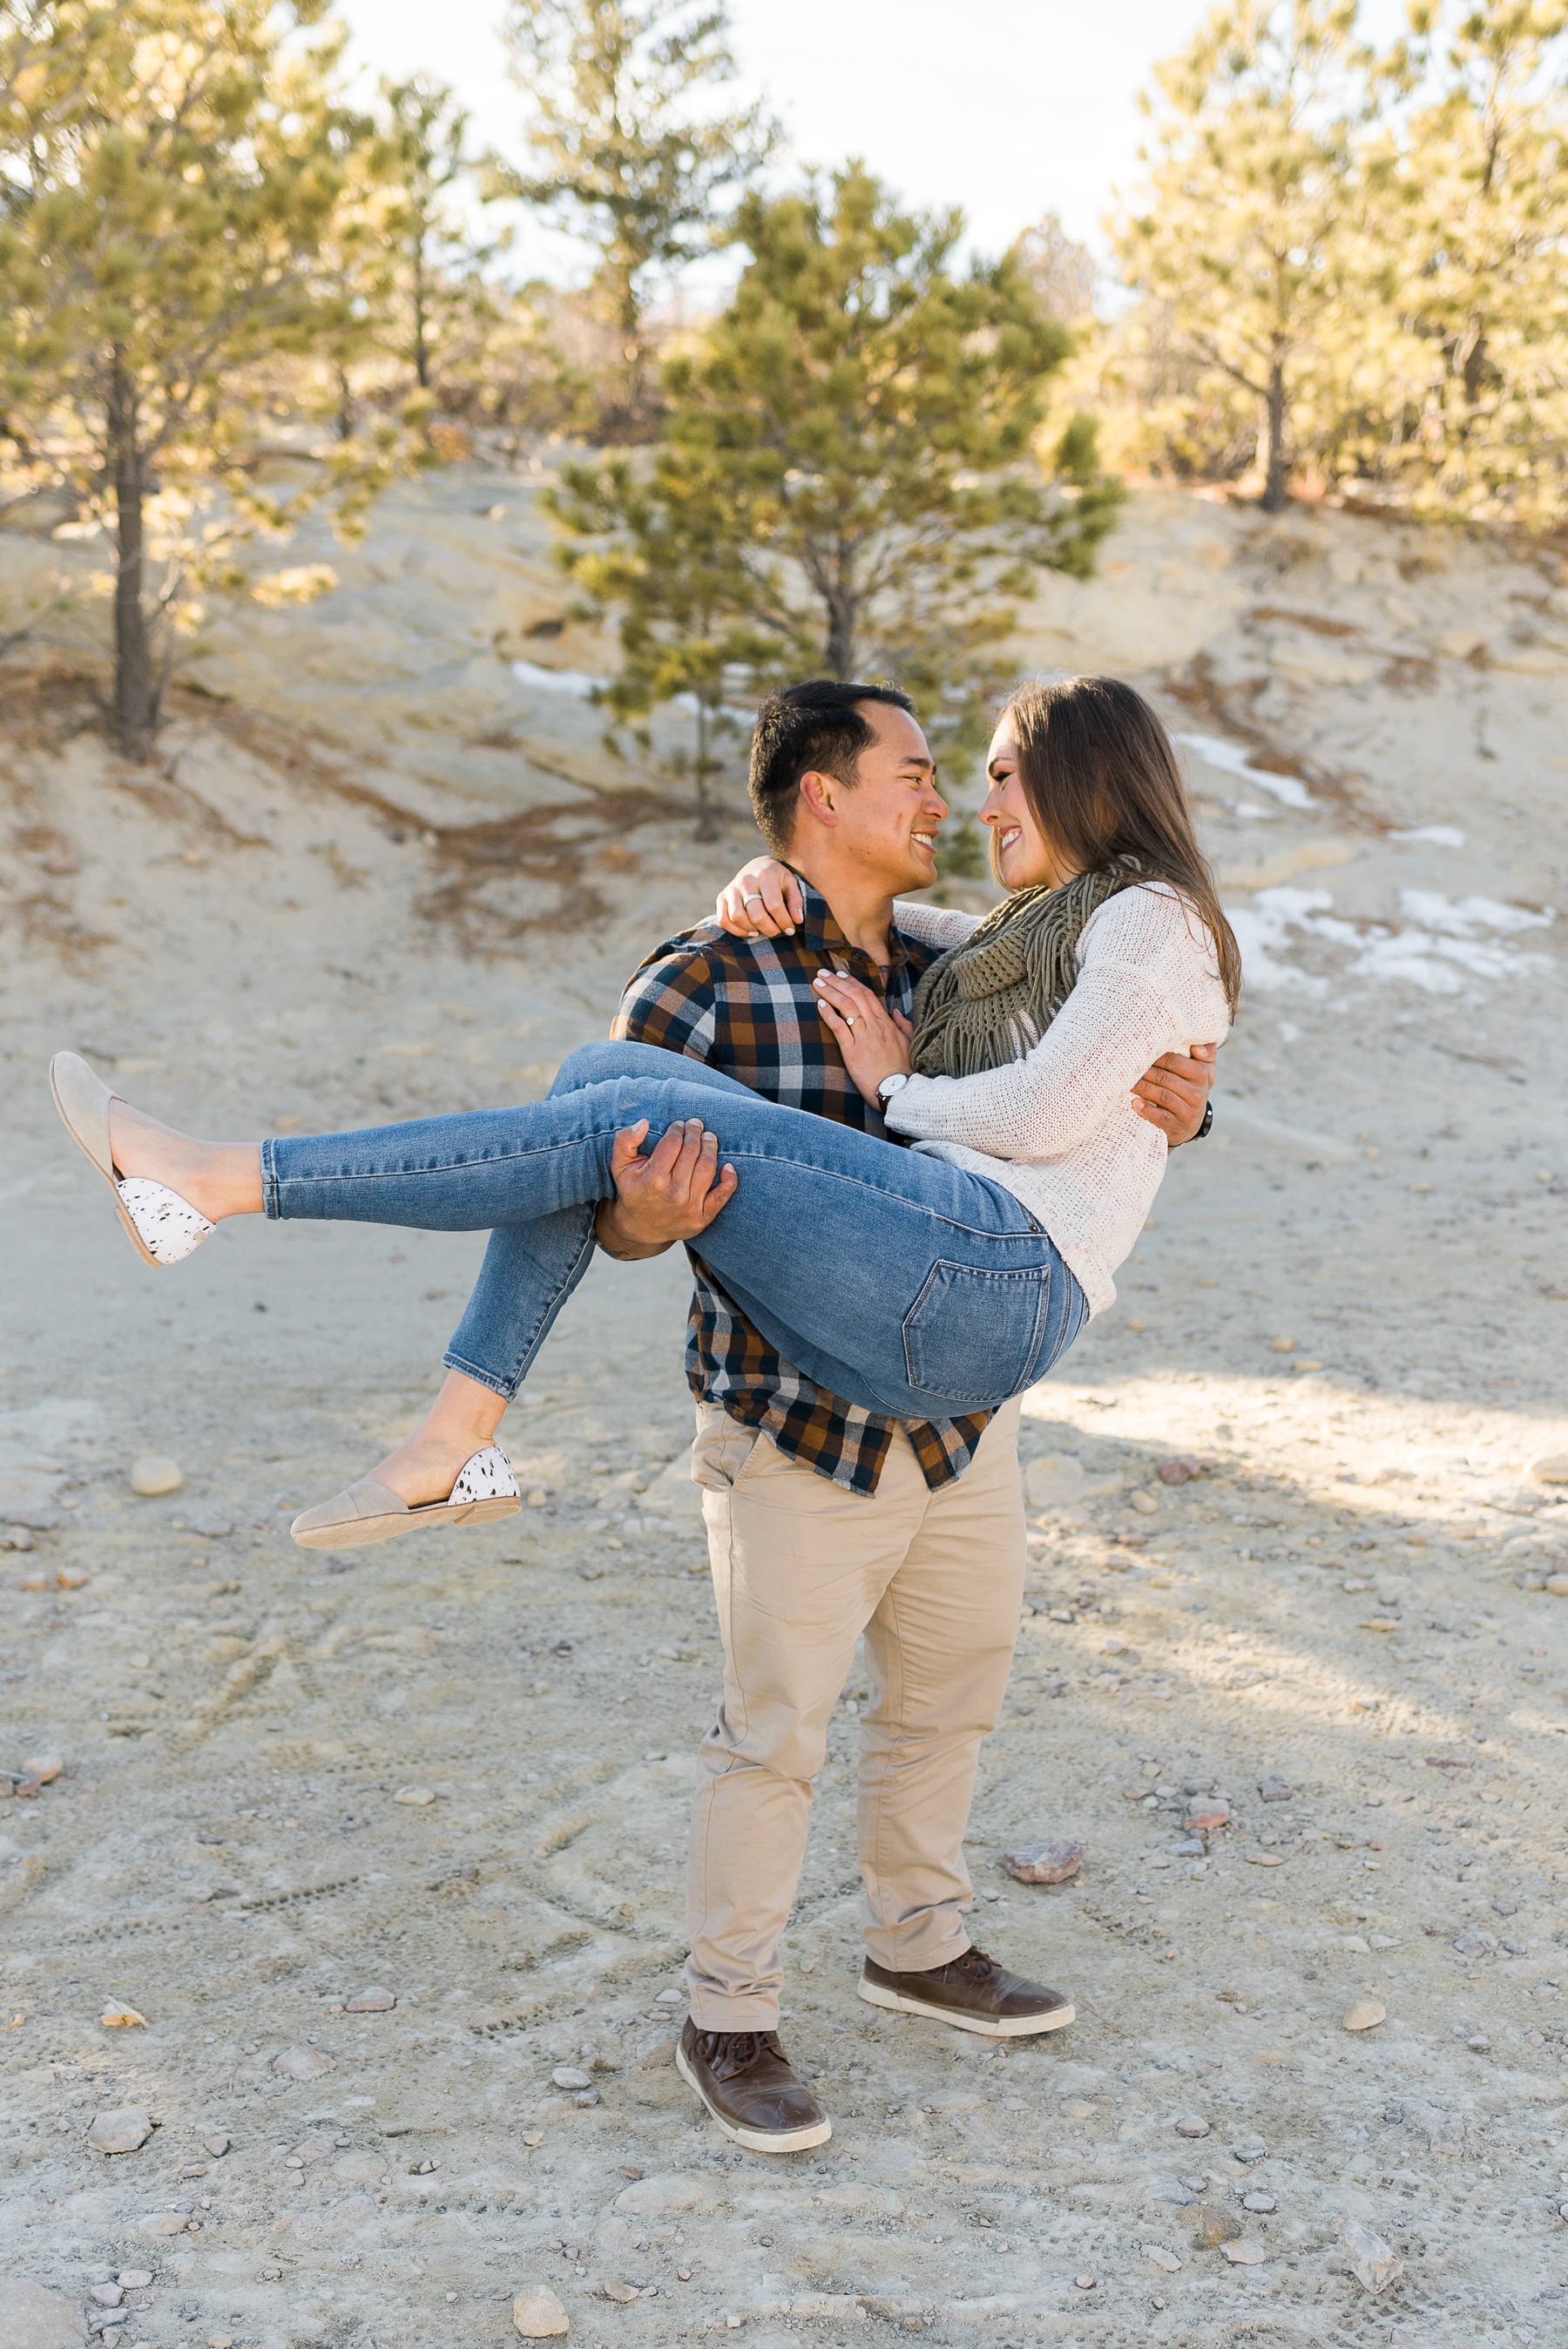 Guy picking up girl for colorado springs engagement photos